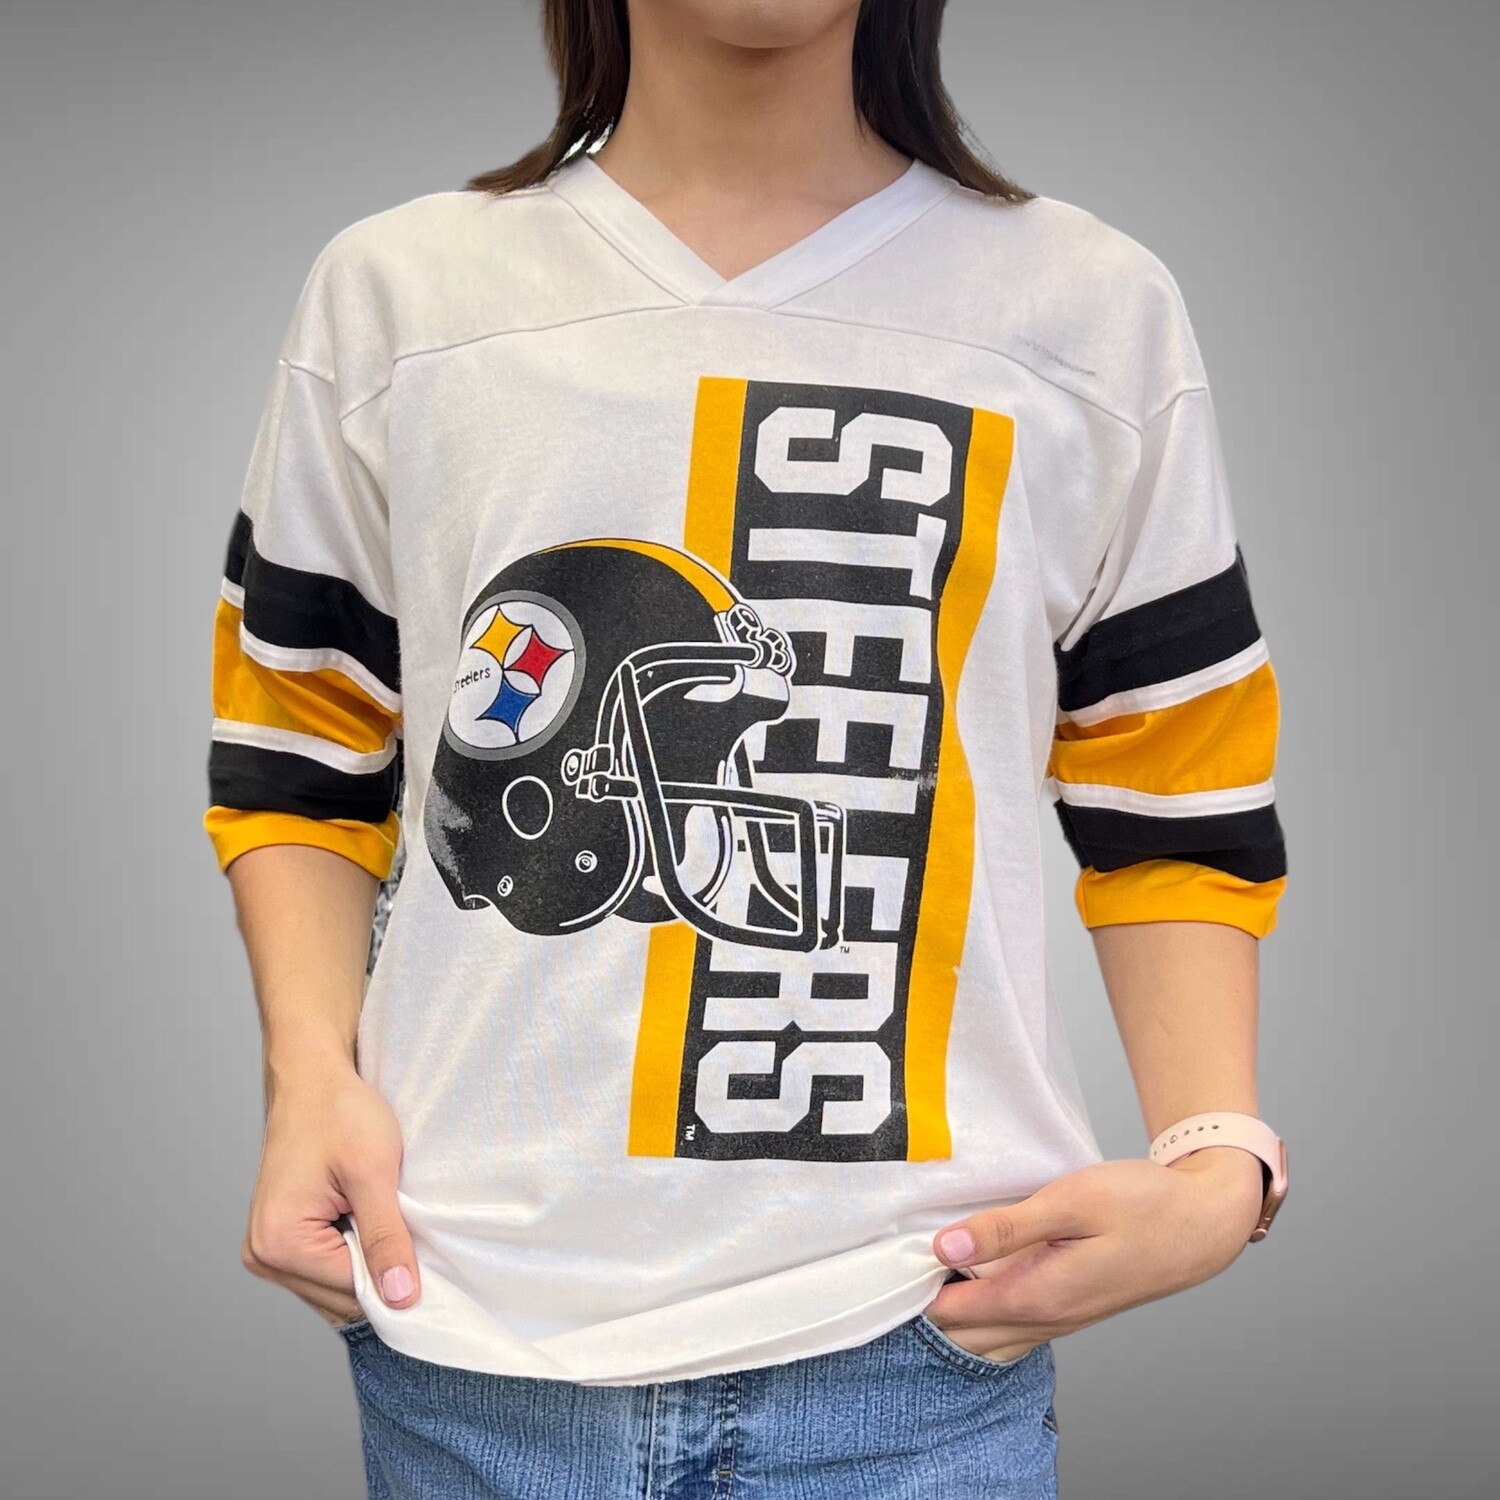 Vintage 80s Steelers Helmet Tee, Size: Large, Color: White, Style: Pittsburgh